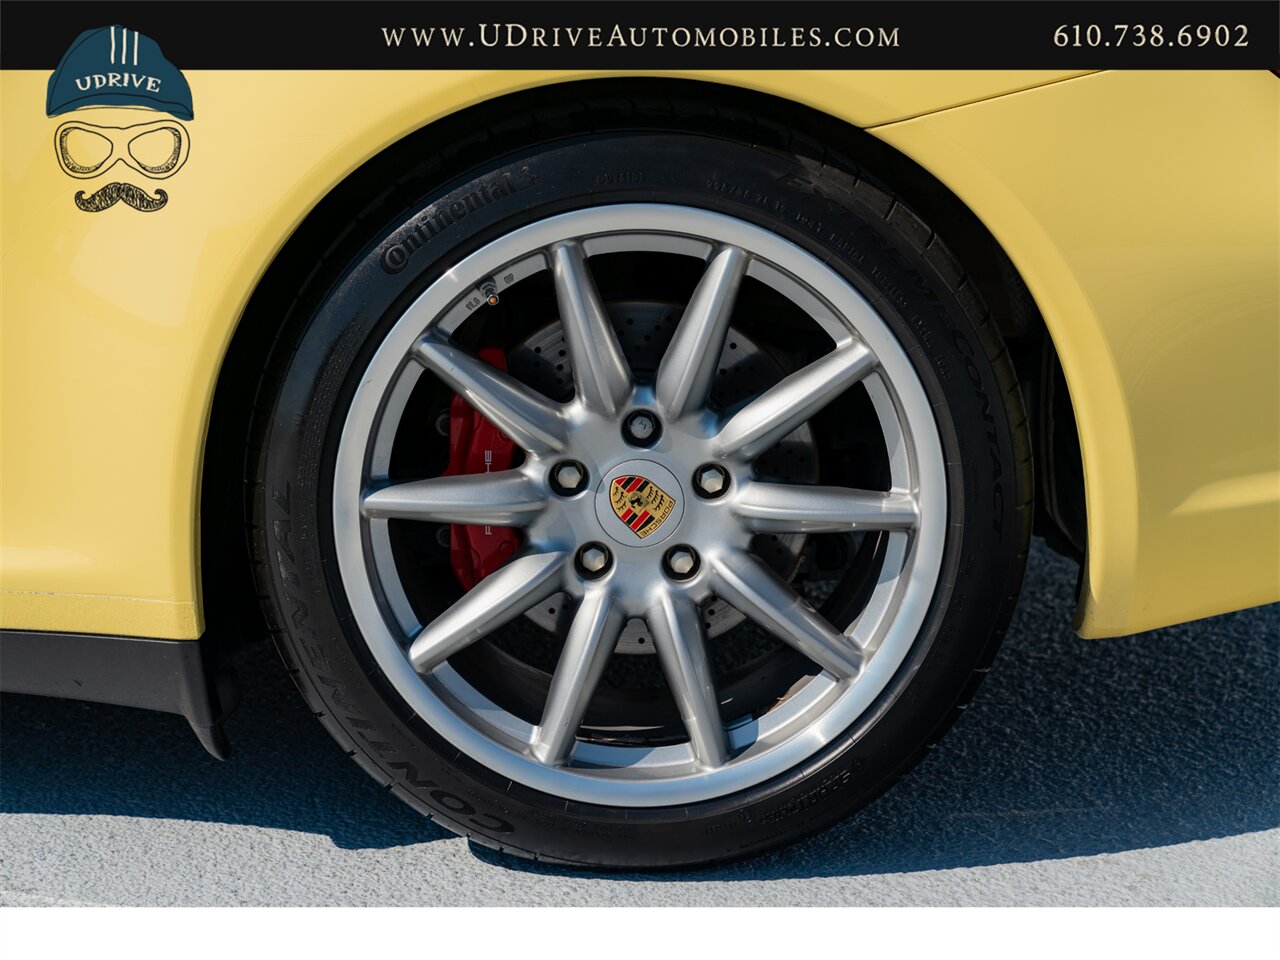 2007 Porsche 911 Carrera 4S 997 C4S Paint To Sample Pastel Yellow  6 Speed Sport Chrono Full Leather Yellow Gauges - Photo 49 - West Chester, PA 19382